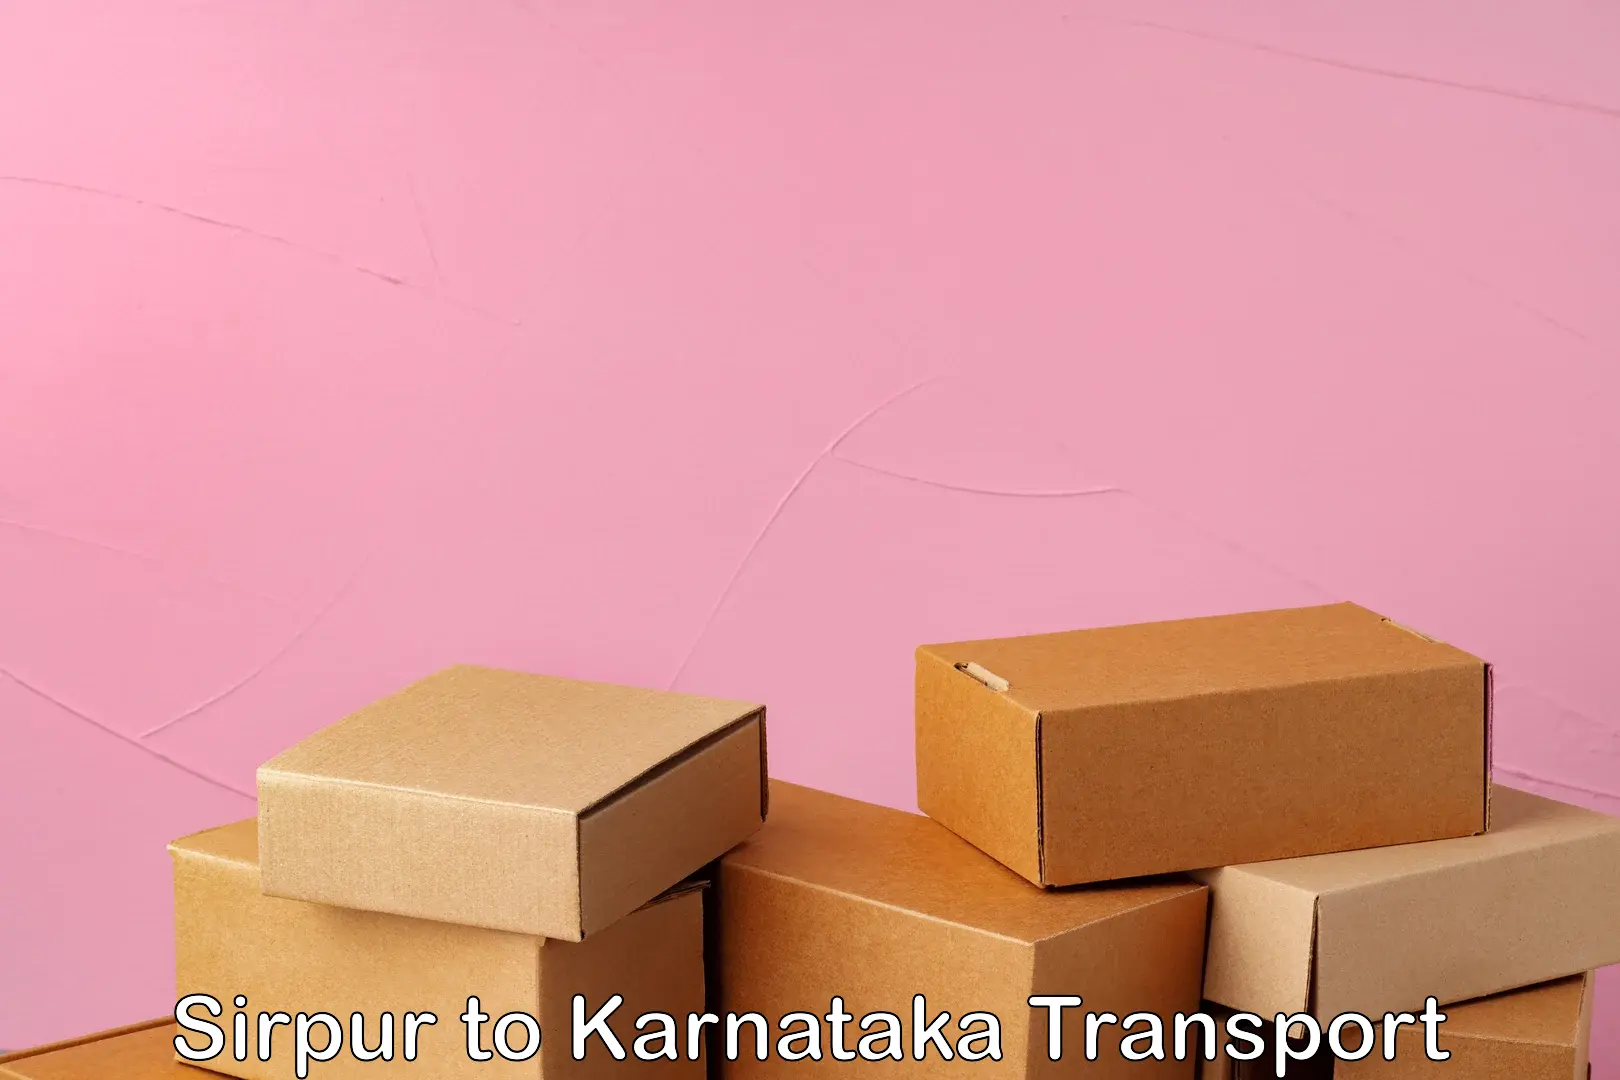 Parcel transport services in Sirpur to Kulshekar